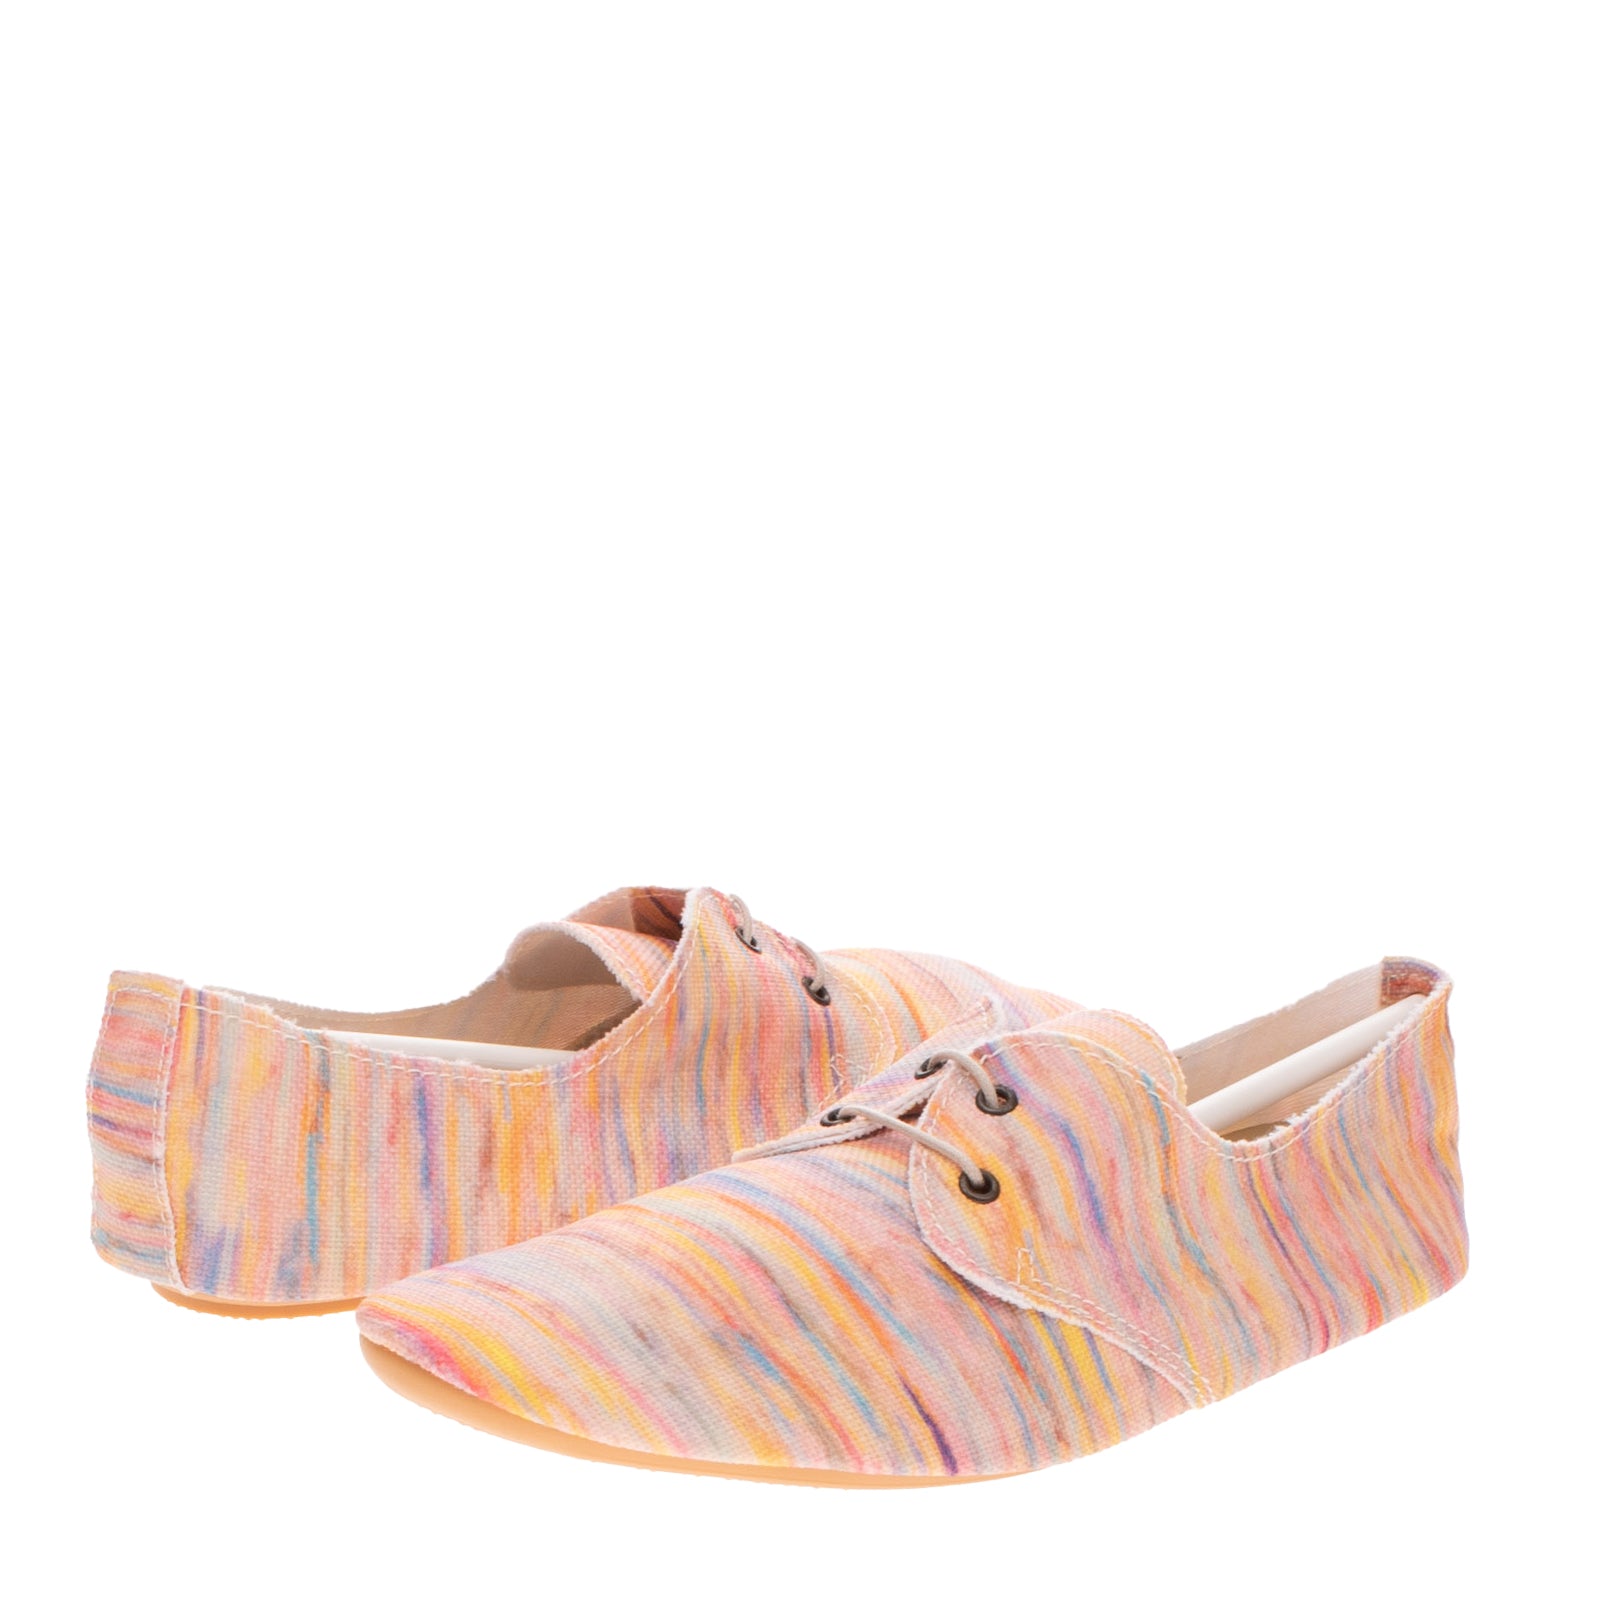 ANNIEL Lace Up Shoes Size 40 UK 7 US 10 Patterned Multicoloured Made in Italy gallery main photo